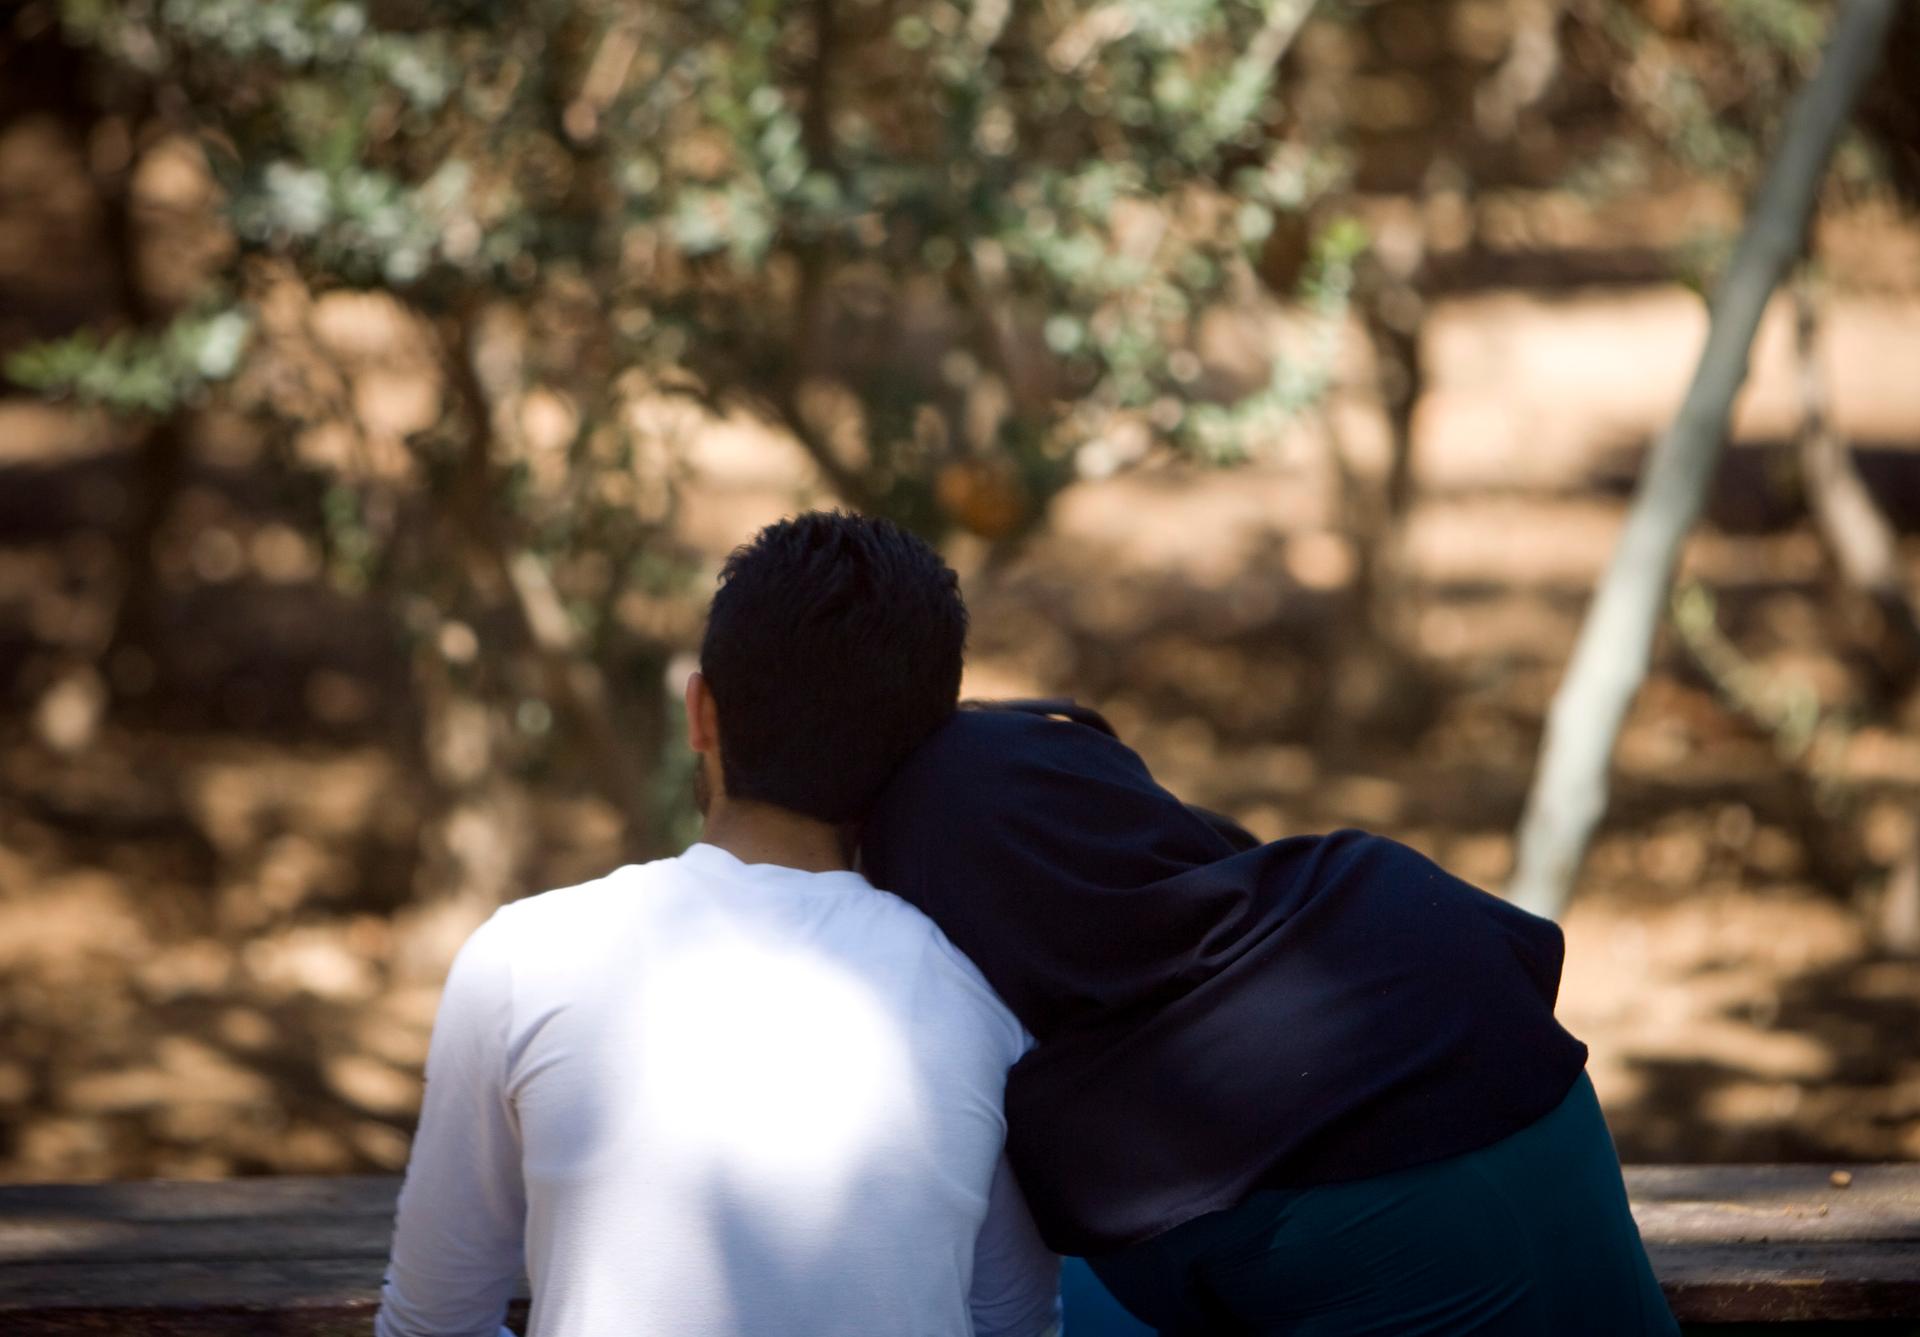 An Iranian couple rests in a park in central Tehran.